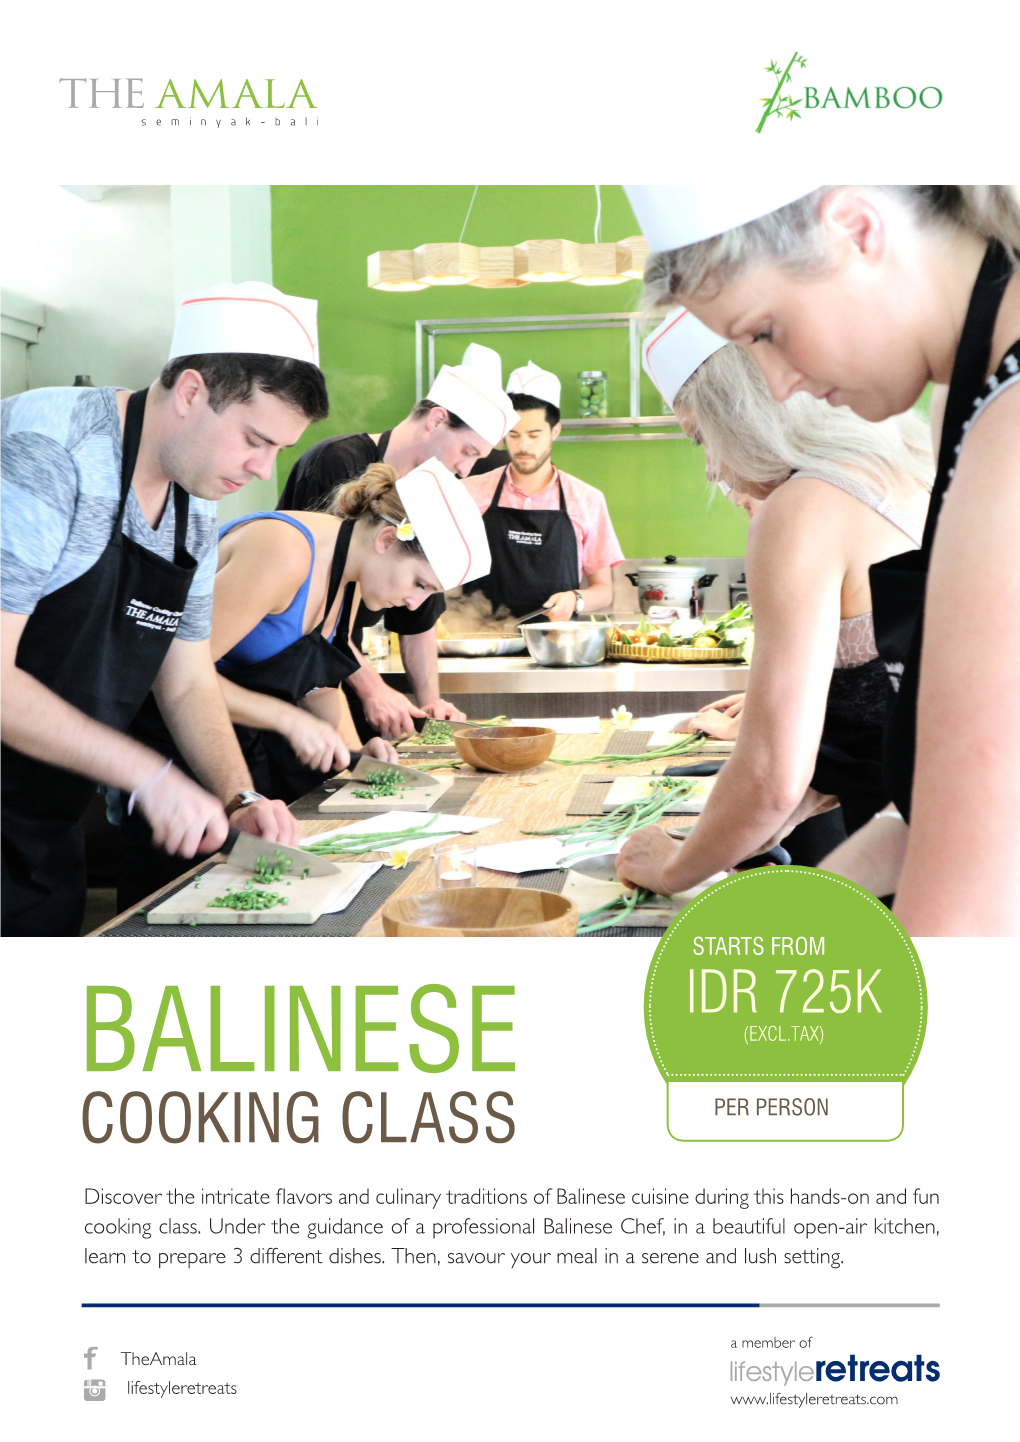 Balinese (Excl.Tax) Cooking Class Per Person